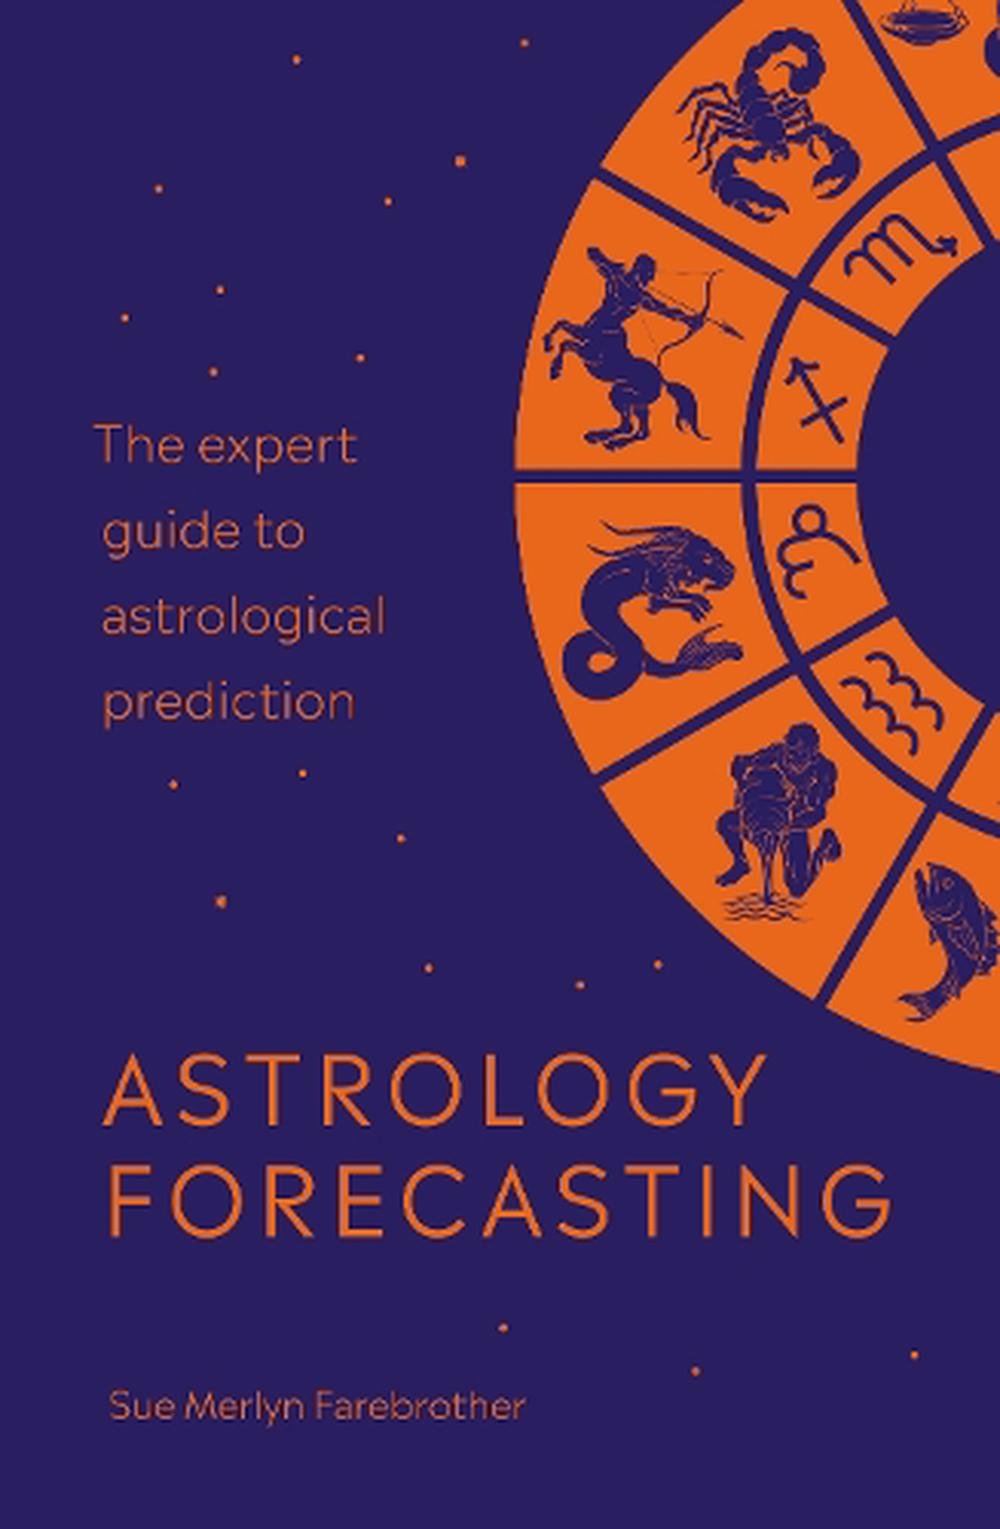 Astrology Forecasting The expert guide to astrological prediction by